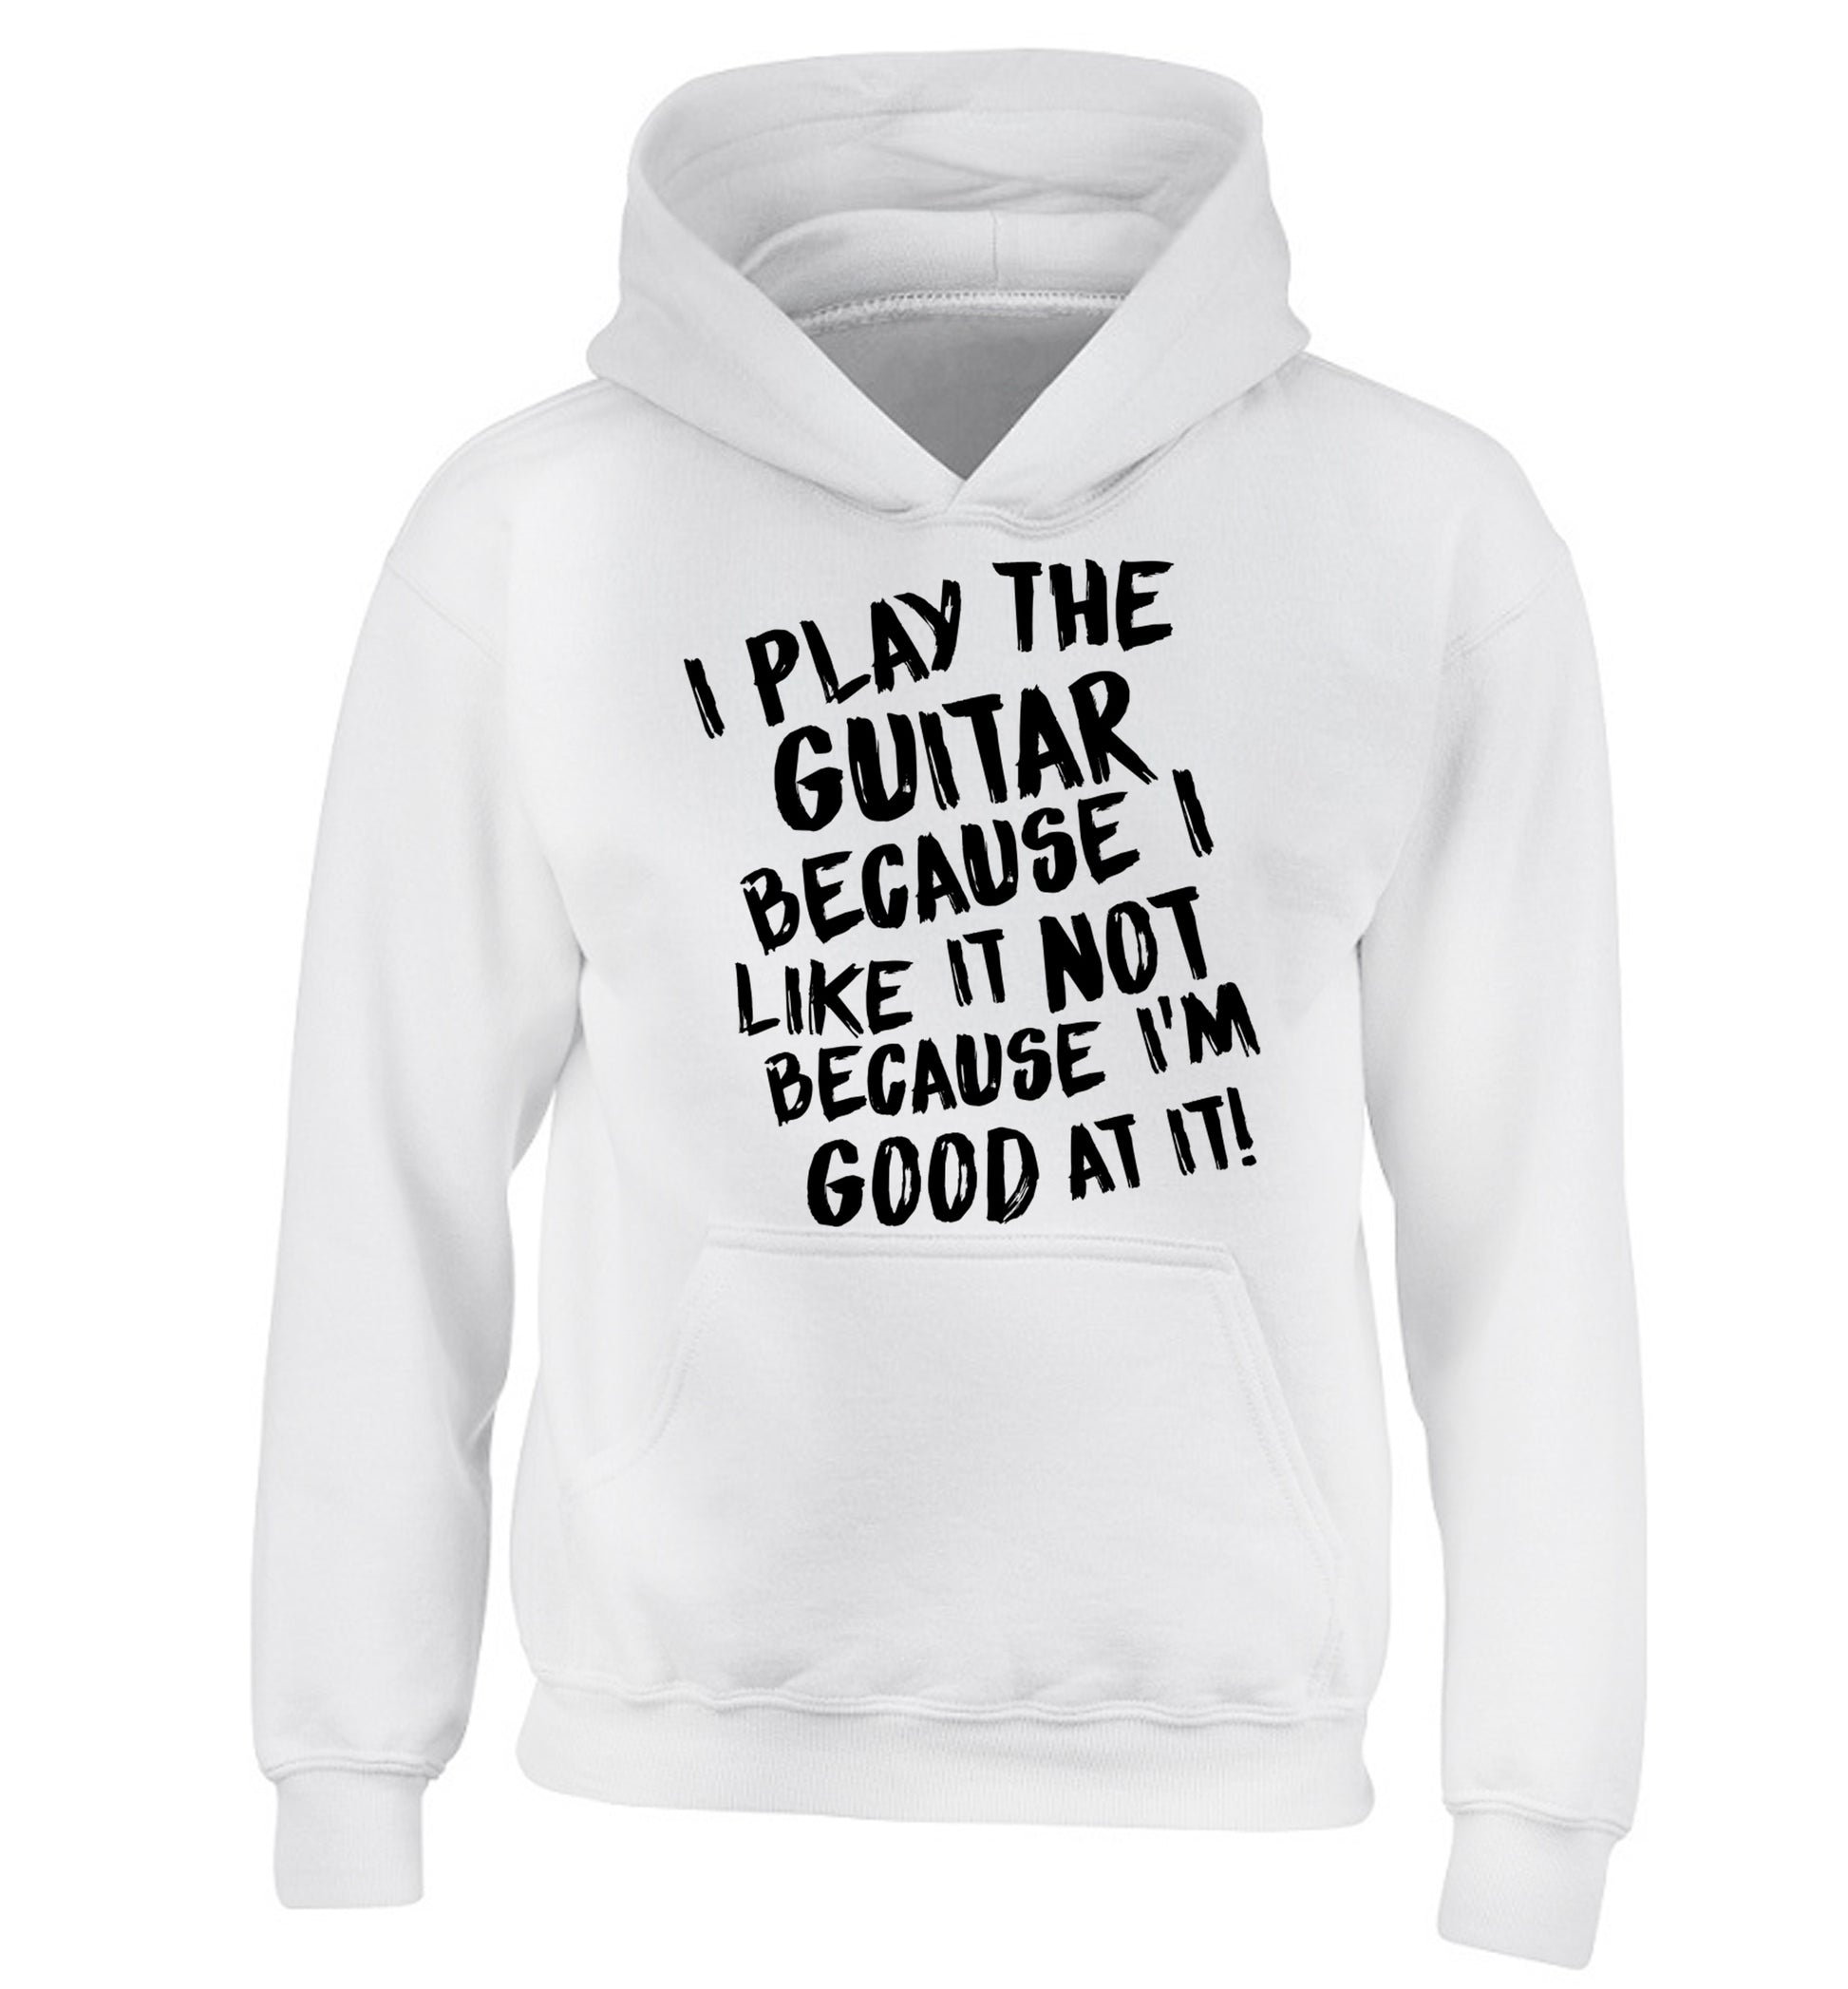 I play the guitar because I like it not because I'm good at it children's white hoodie 12-14 Years